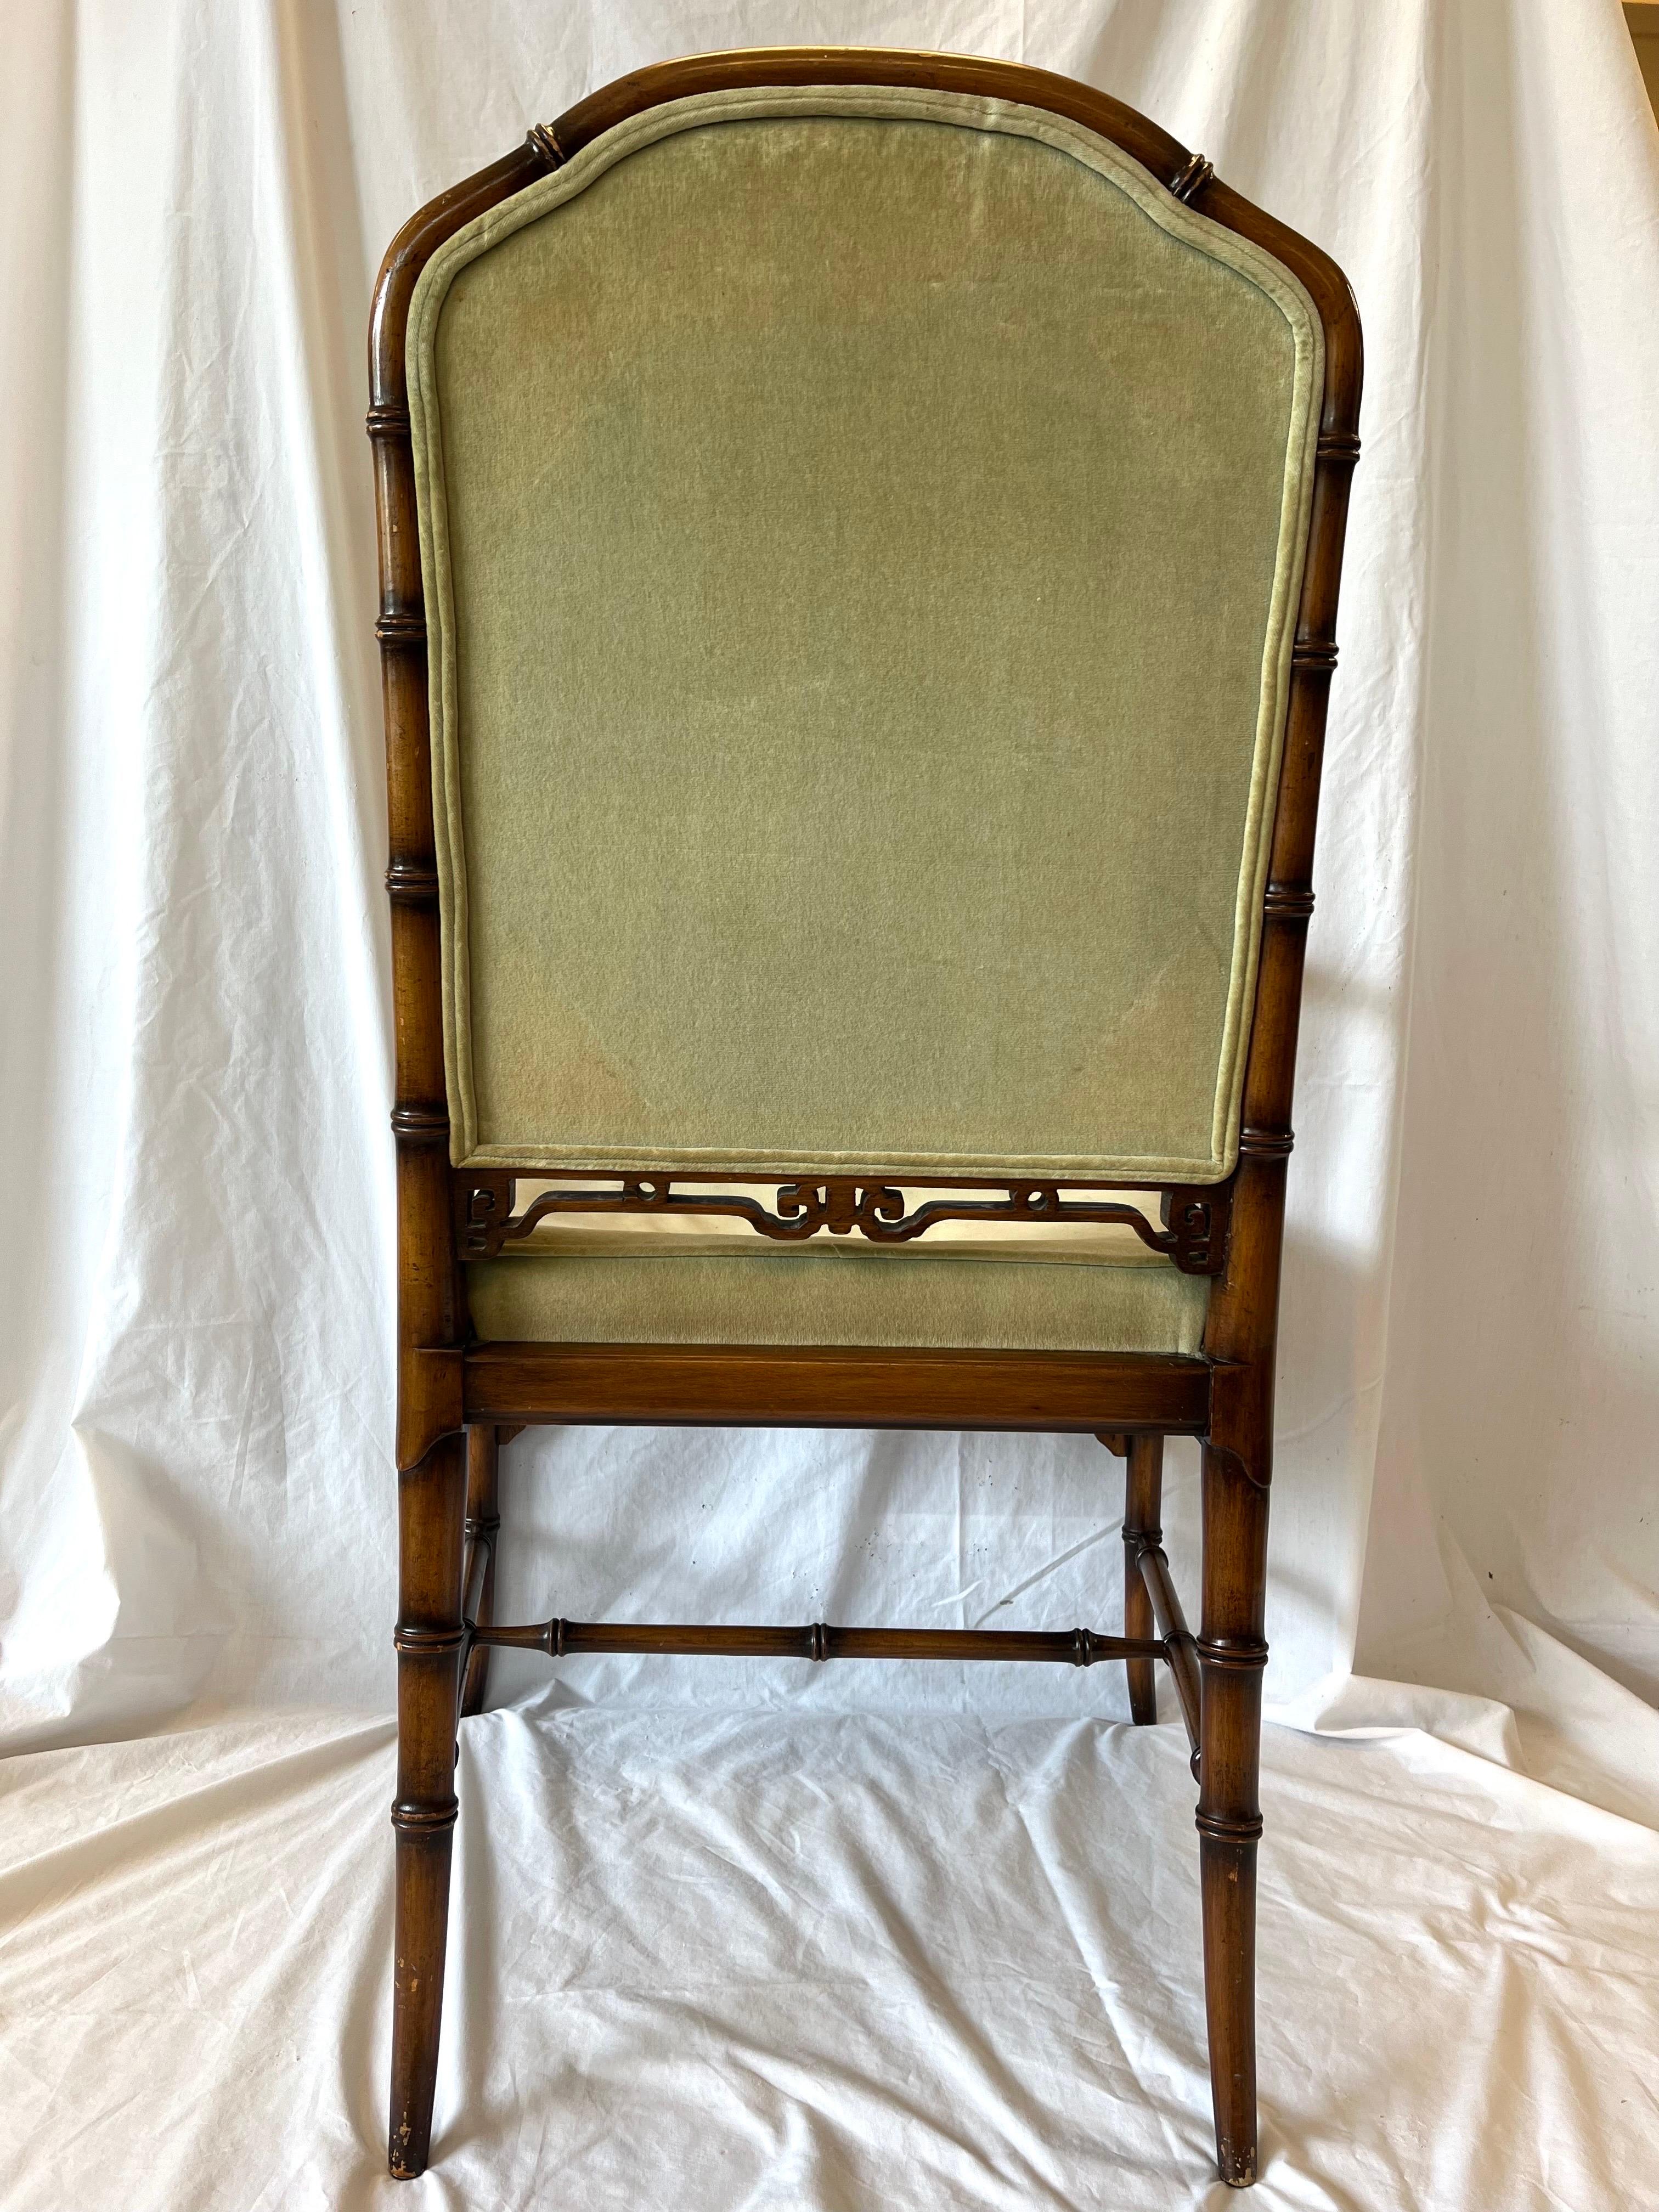 Vintage Faux Bamboo Chinoiserie Style Upholstered Fretwork Armchair Desk Chair 3